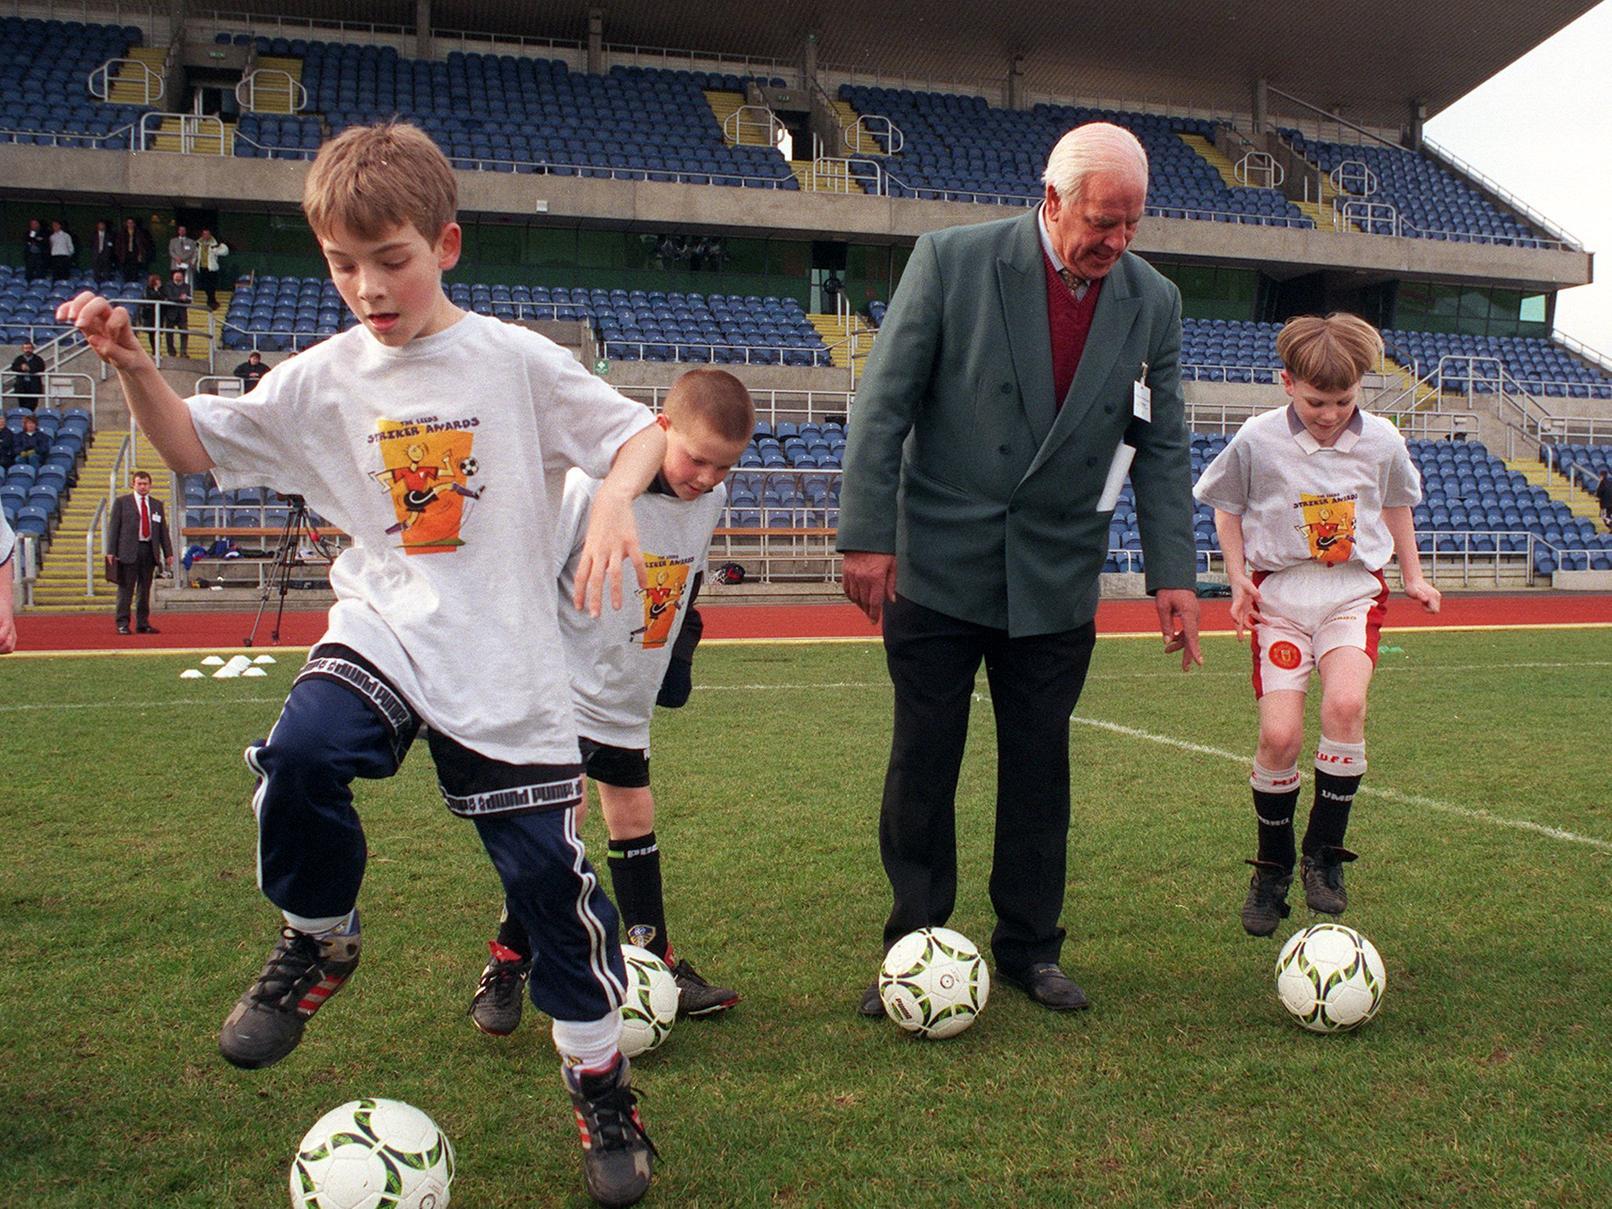 Leeds United legend John Charles was at South Leeds Stadium to give tips to these football-mad youngsters.